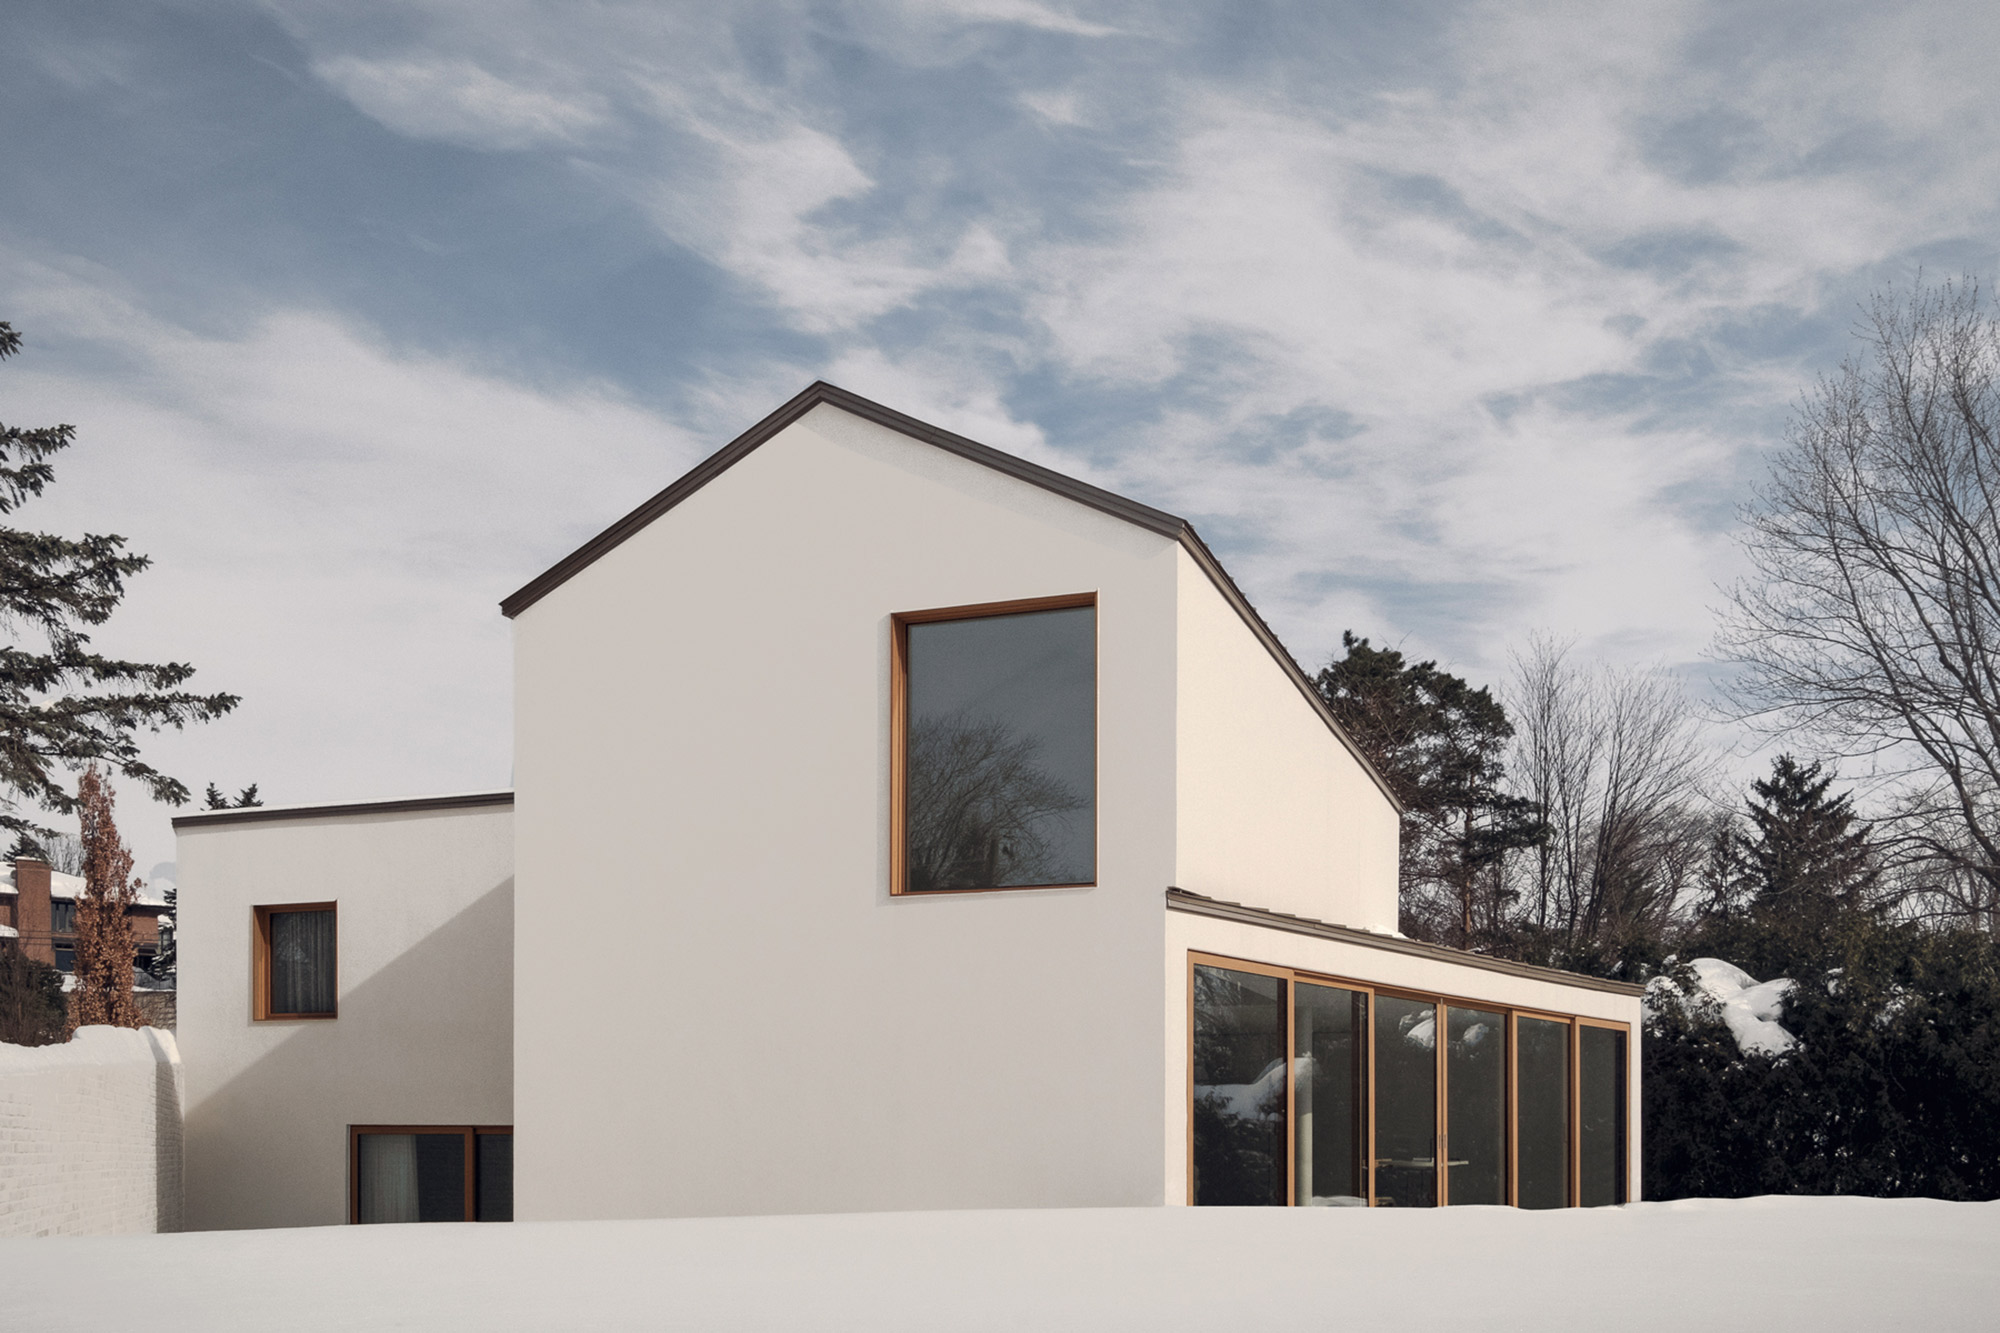 Norm House by Alain Carle Architecte, front view